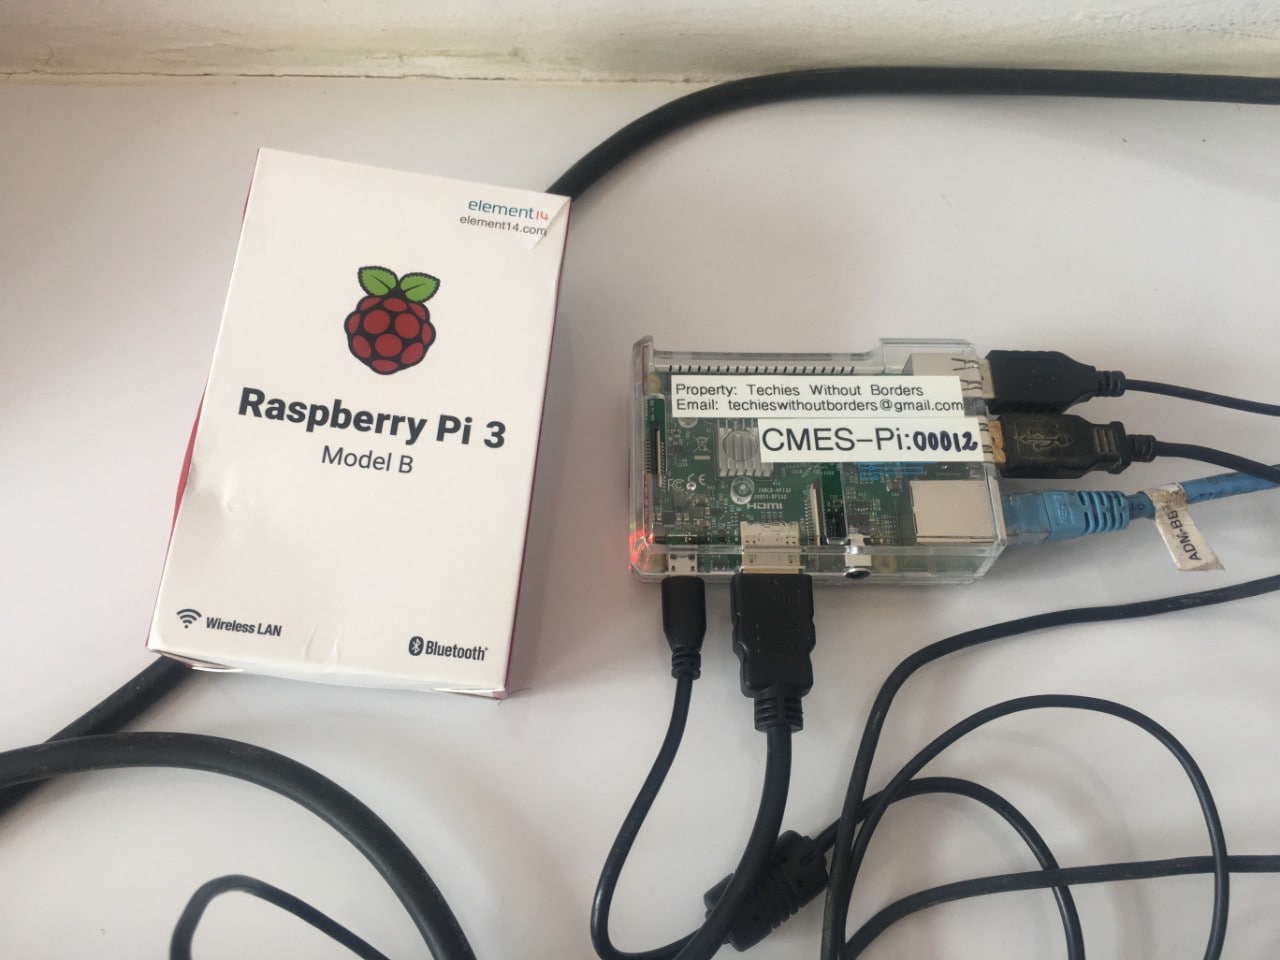 Photograph of a raspberry-pi device and its user manual